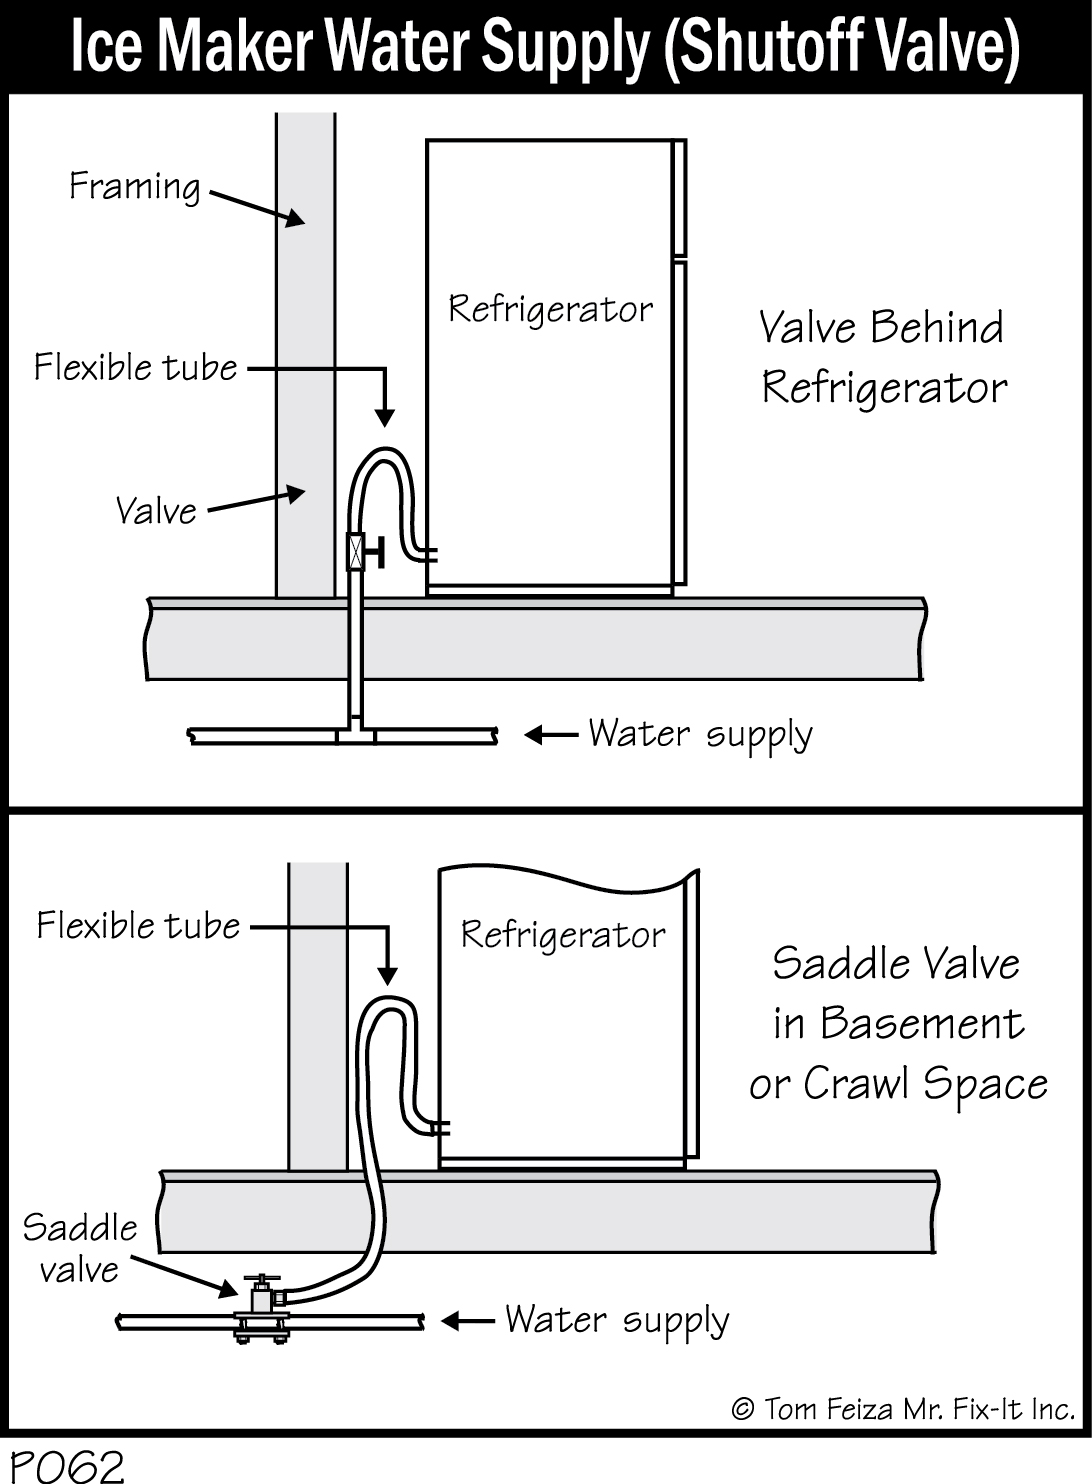 Water supply for ice maker